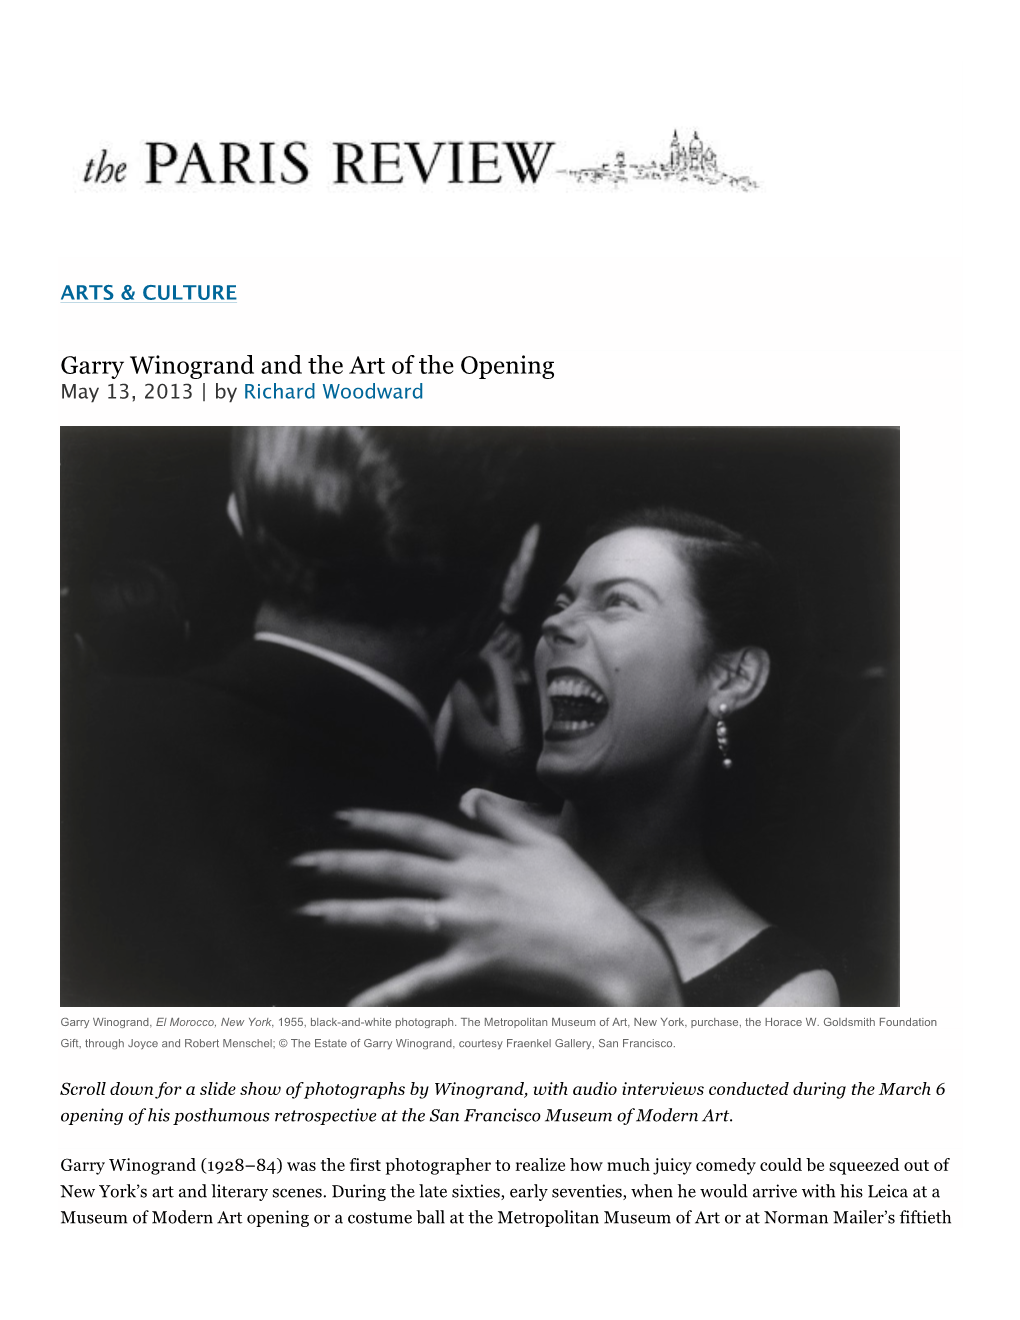 Garry Winogrand and the Art of the Opening May 13, 2013 | by Richard Woodward